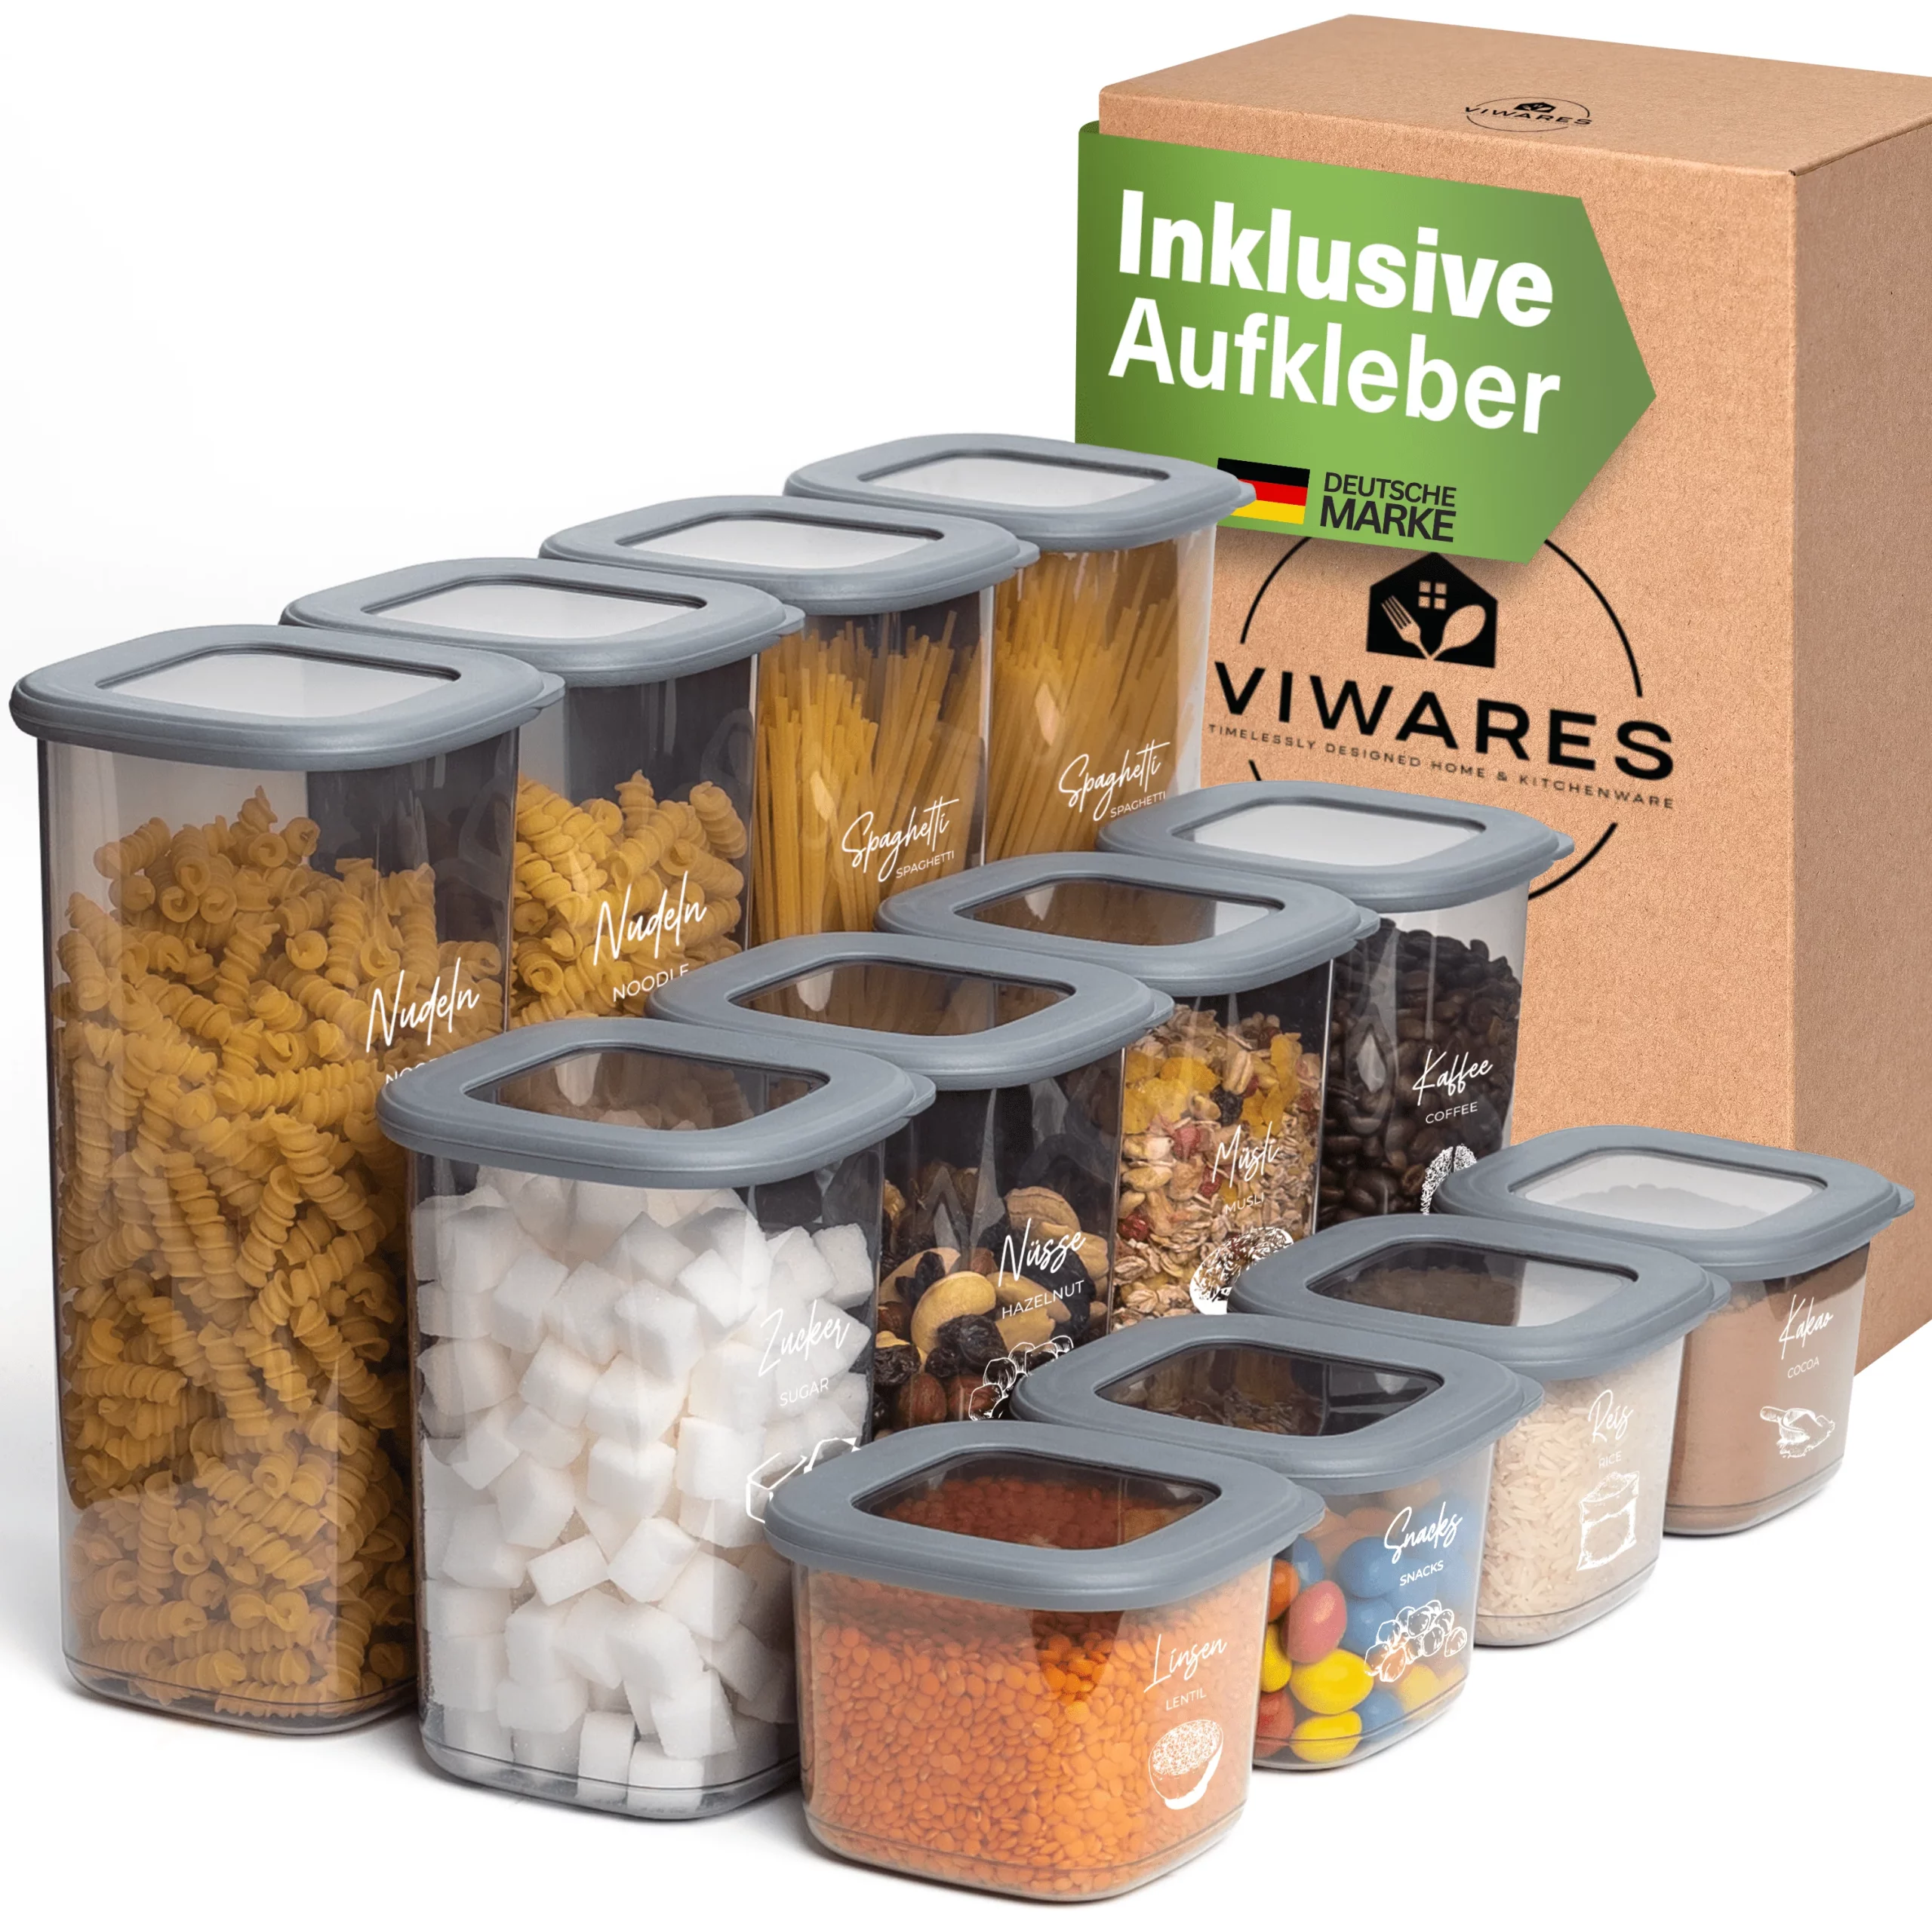 Storage container set from Viwares